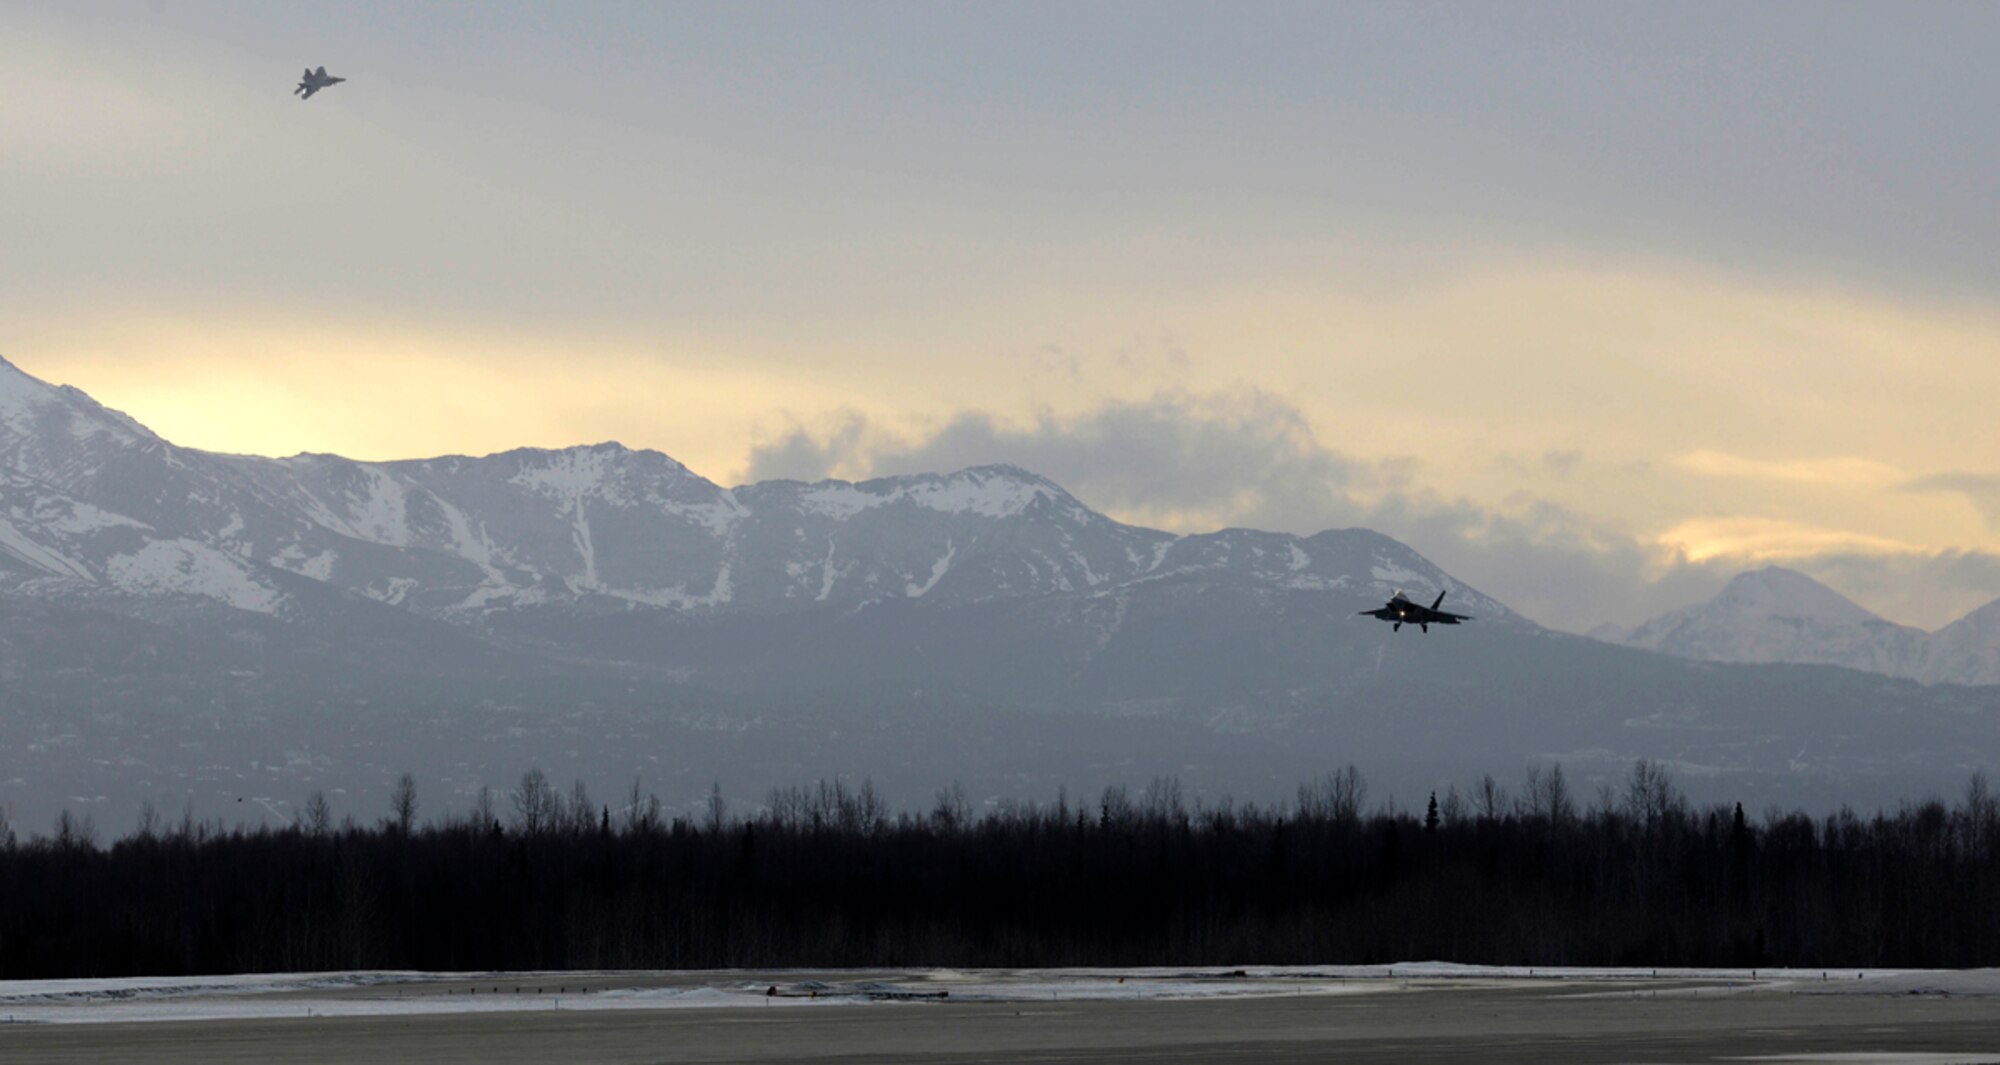 F-22 Raptors assigned to the 90th Fighter Squadron prepare to land on Joint Base Elmendorf-Richardson, Alaska, during a Rapid Raptor scenario in Exercise Polar Force 14-2, Feb. 10, 2014. During the exercise, the 3rd Wing practiced the new rapid raptor strategy that will enable combat-ready F-22s to rapidly refuel, rearm and redeploy. (U.S. Air Force photo/Staff Sgt. Sheila deVera)